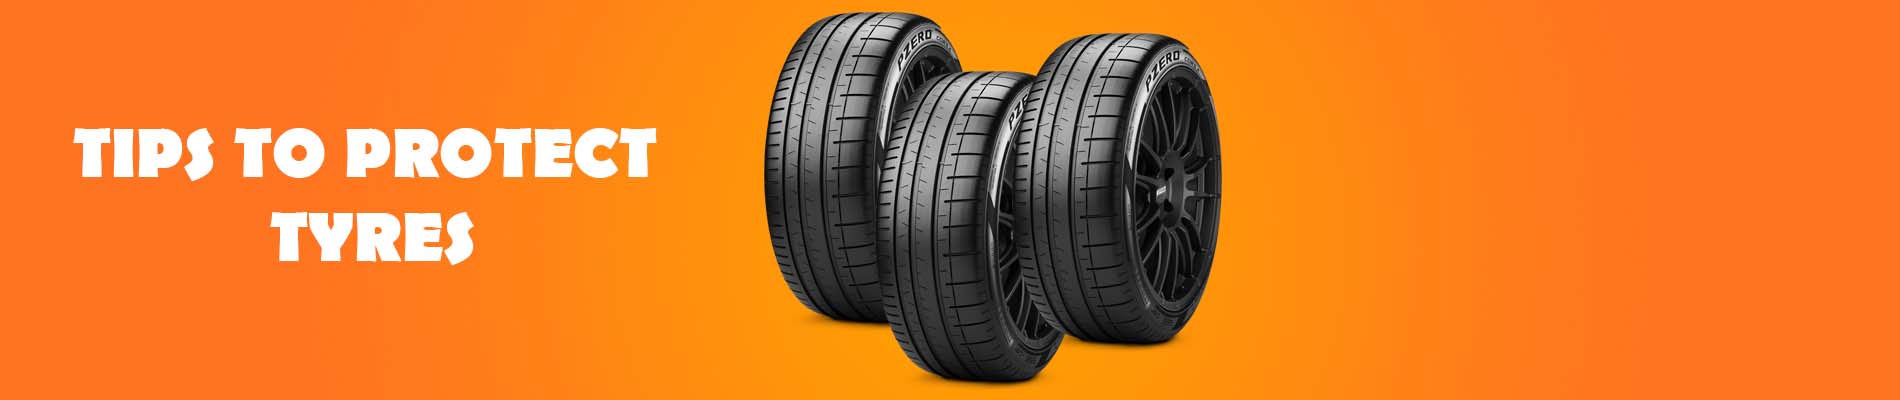 24 hours Mobile Tyre Fitting